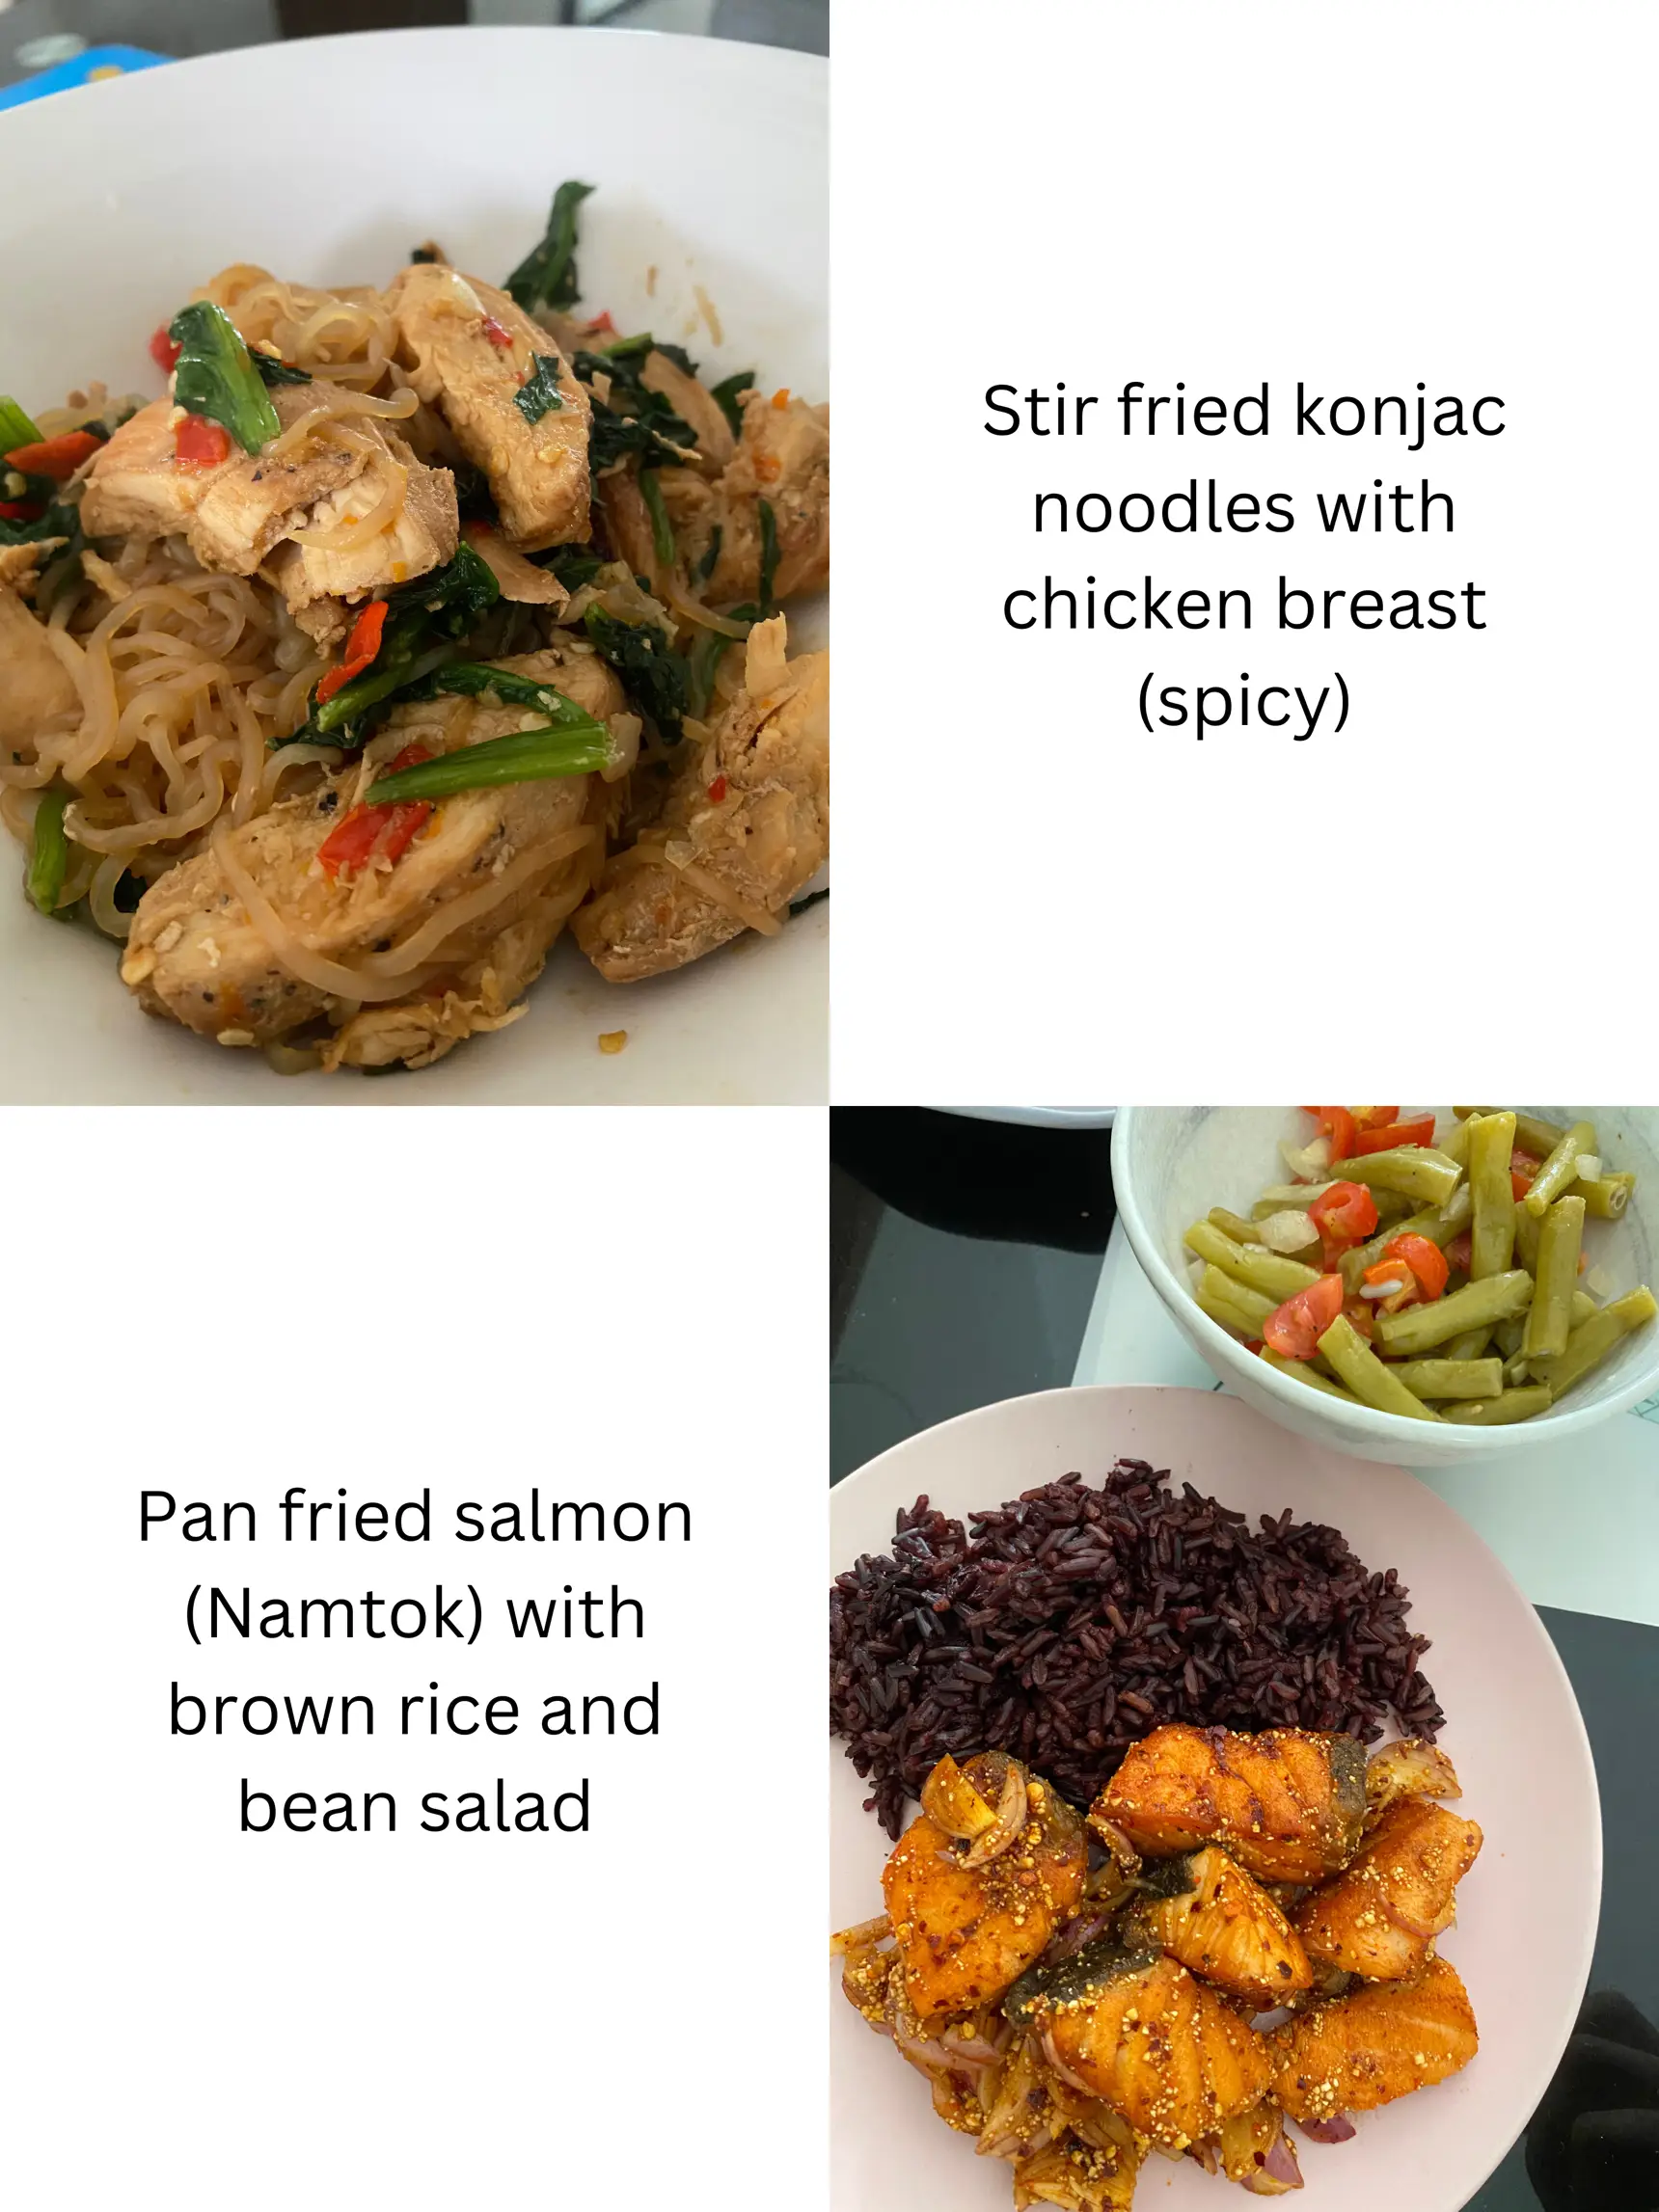 Easy lunch recipes that helped me lose 8kg 💪🏻's images(3)